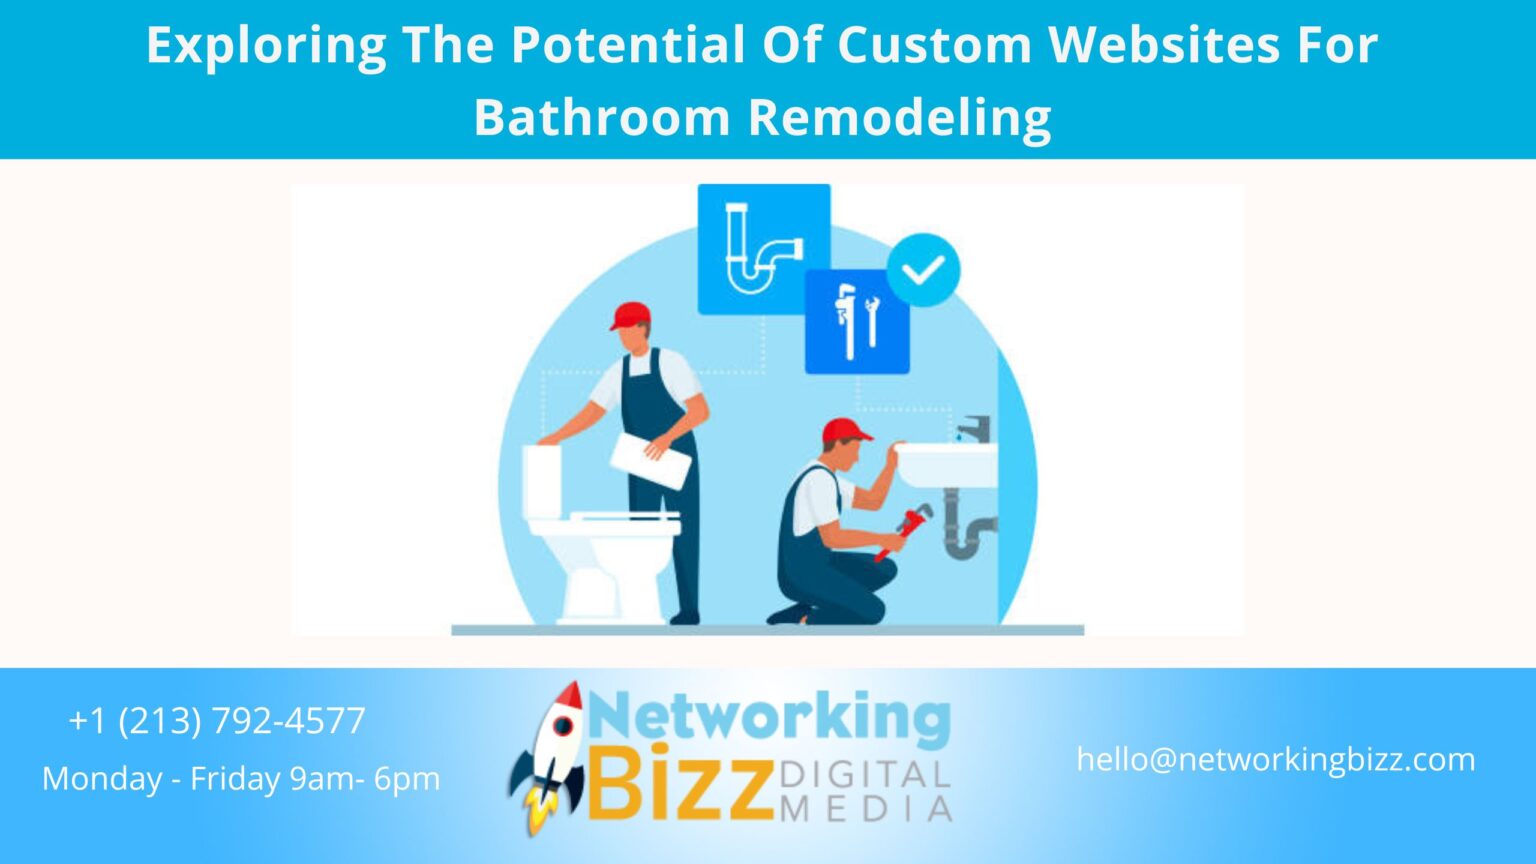 Exploring The Potential Of Custom Websites For Bathroom Remodeling